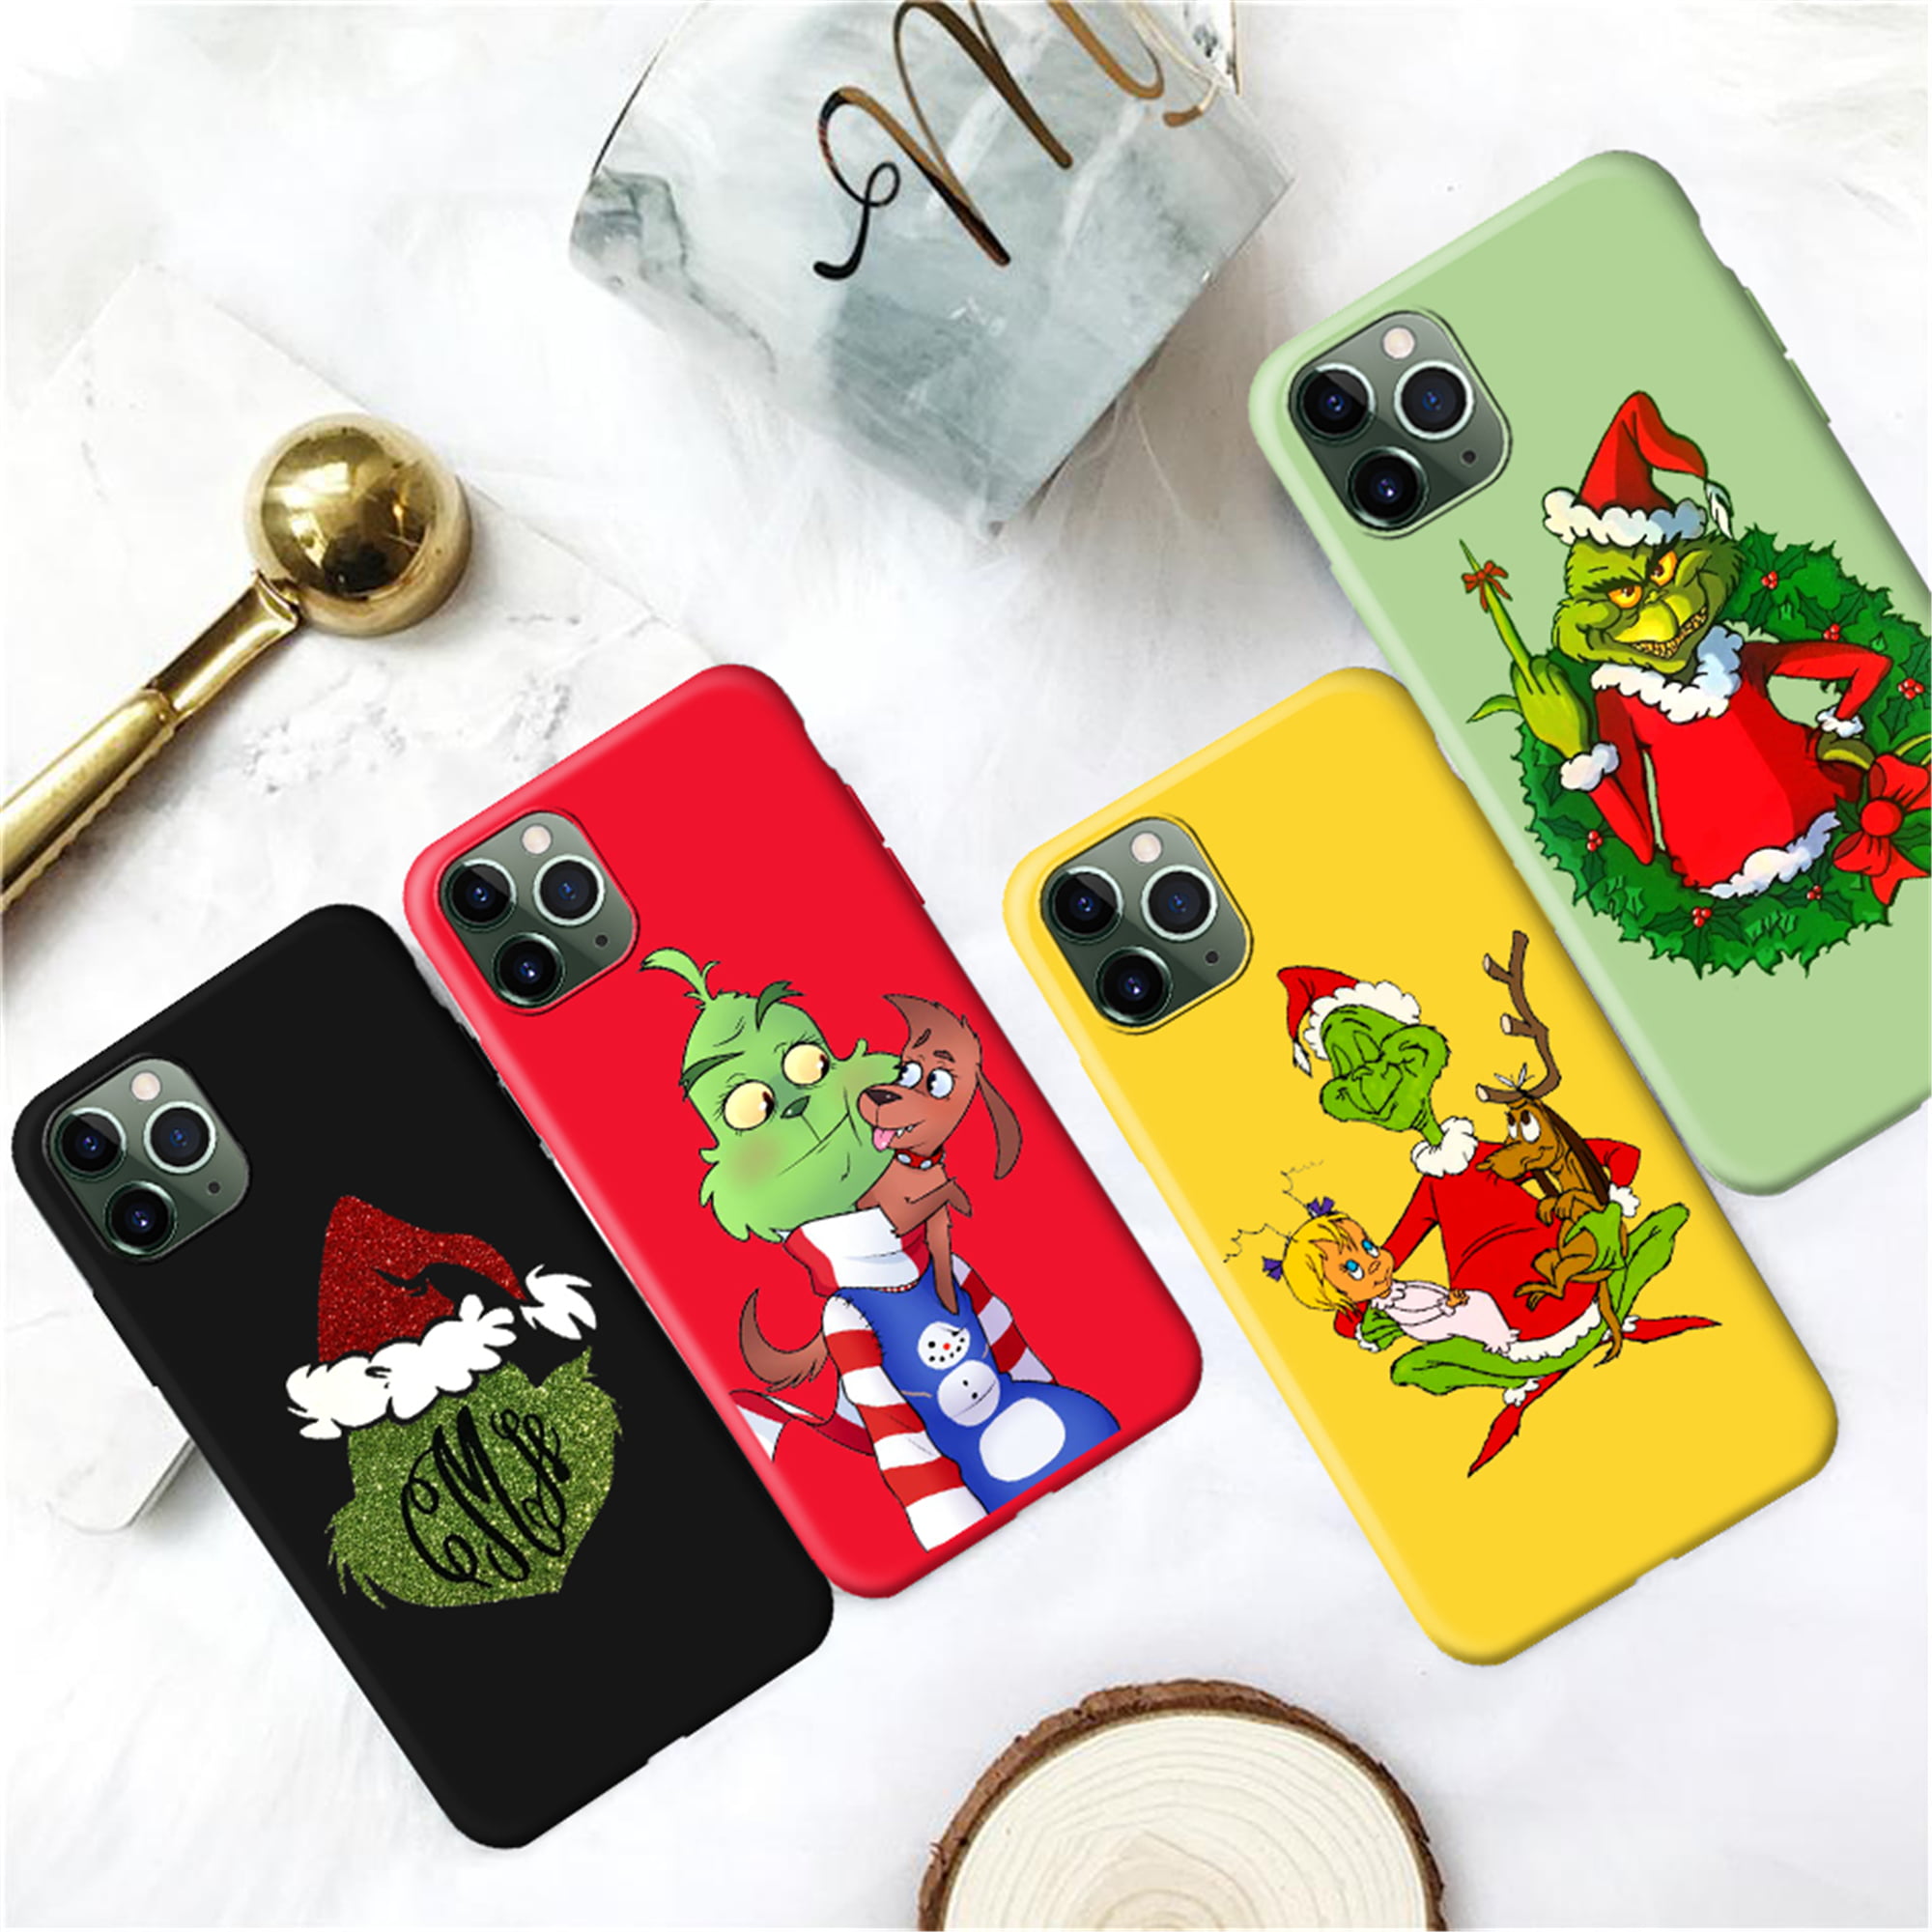 Compatible For Huawei P9 Lite Case Grinch Merry Christmas Back Cover Soft Case For Huawei P9 Lite Protective Case Green Walmart Com